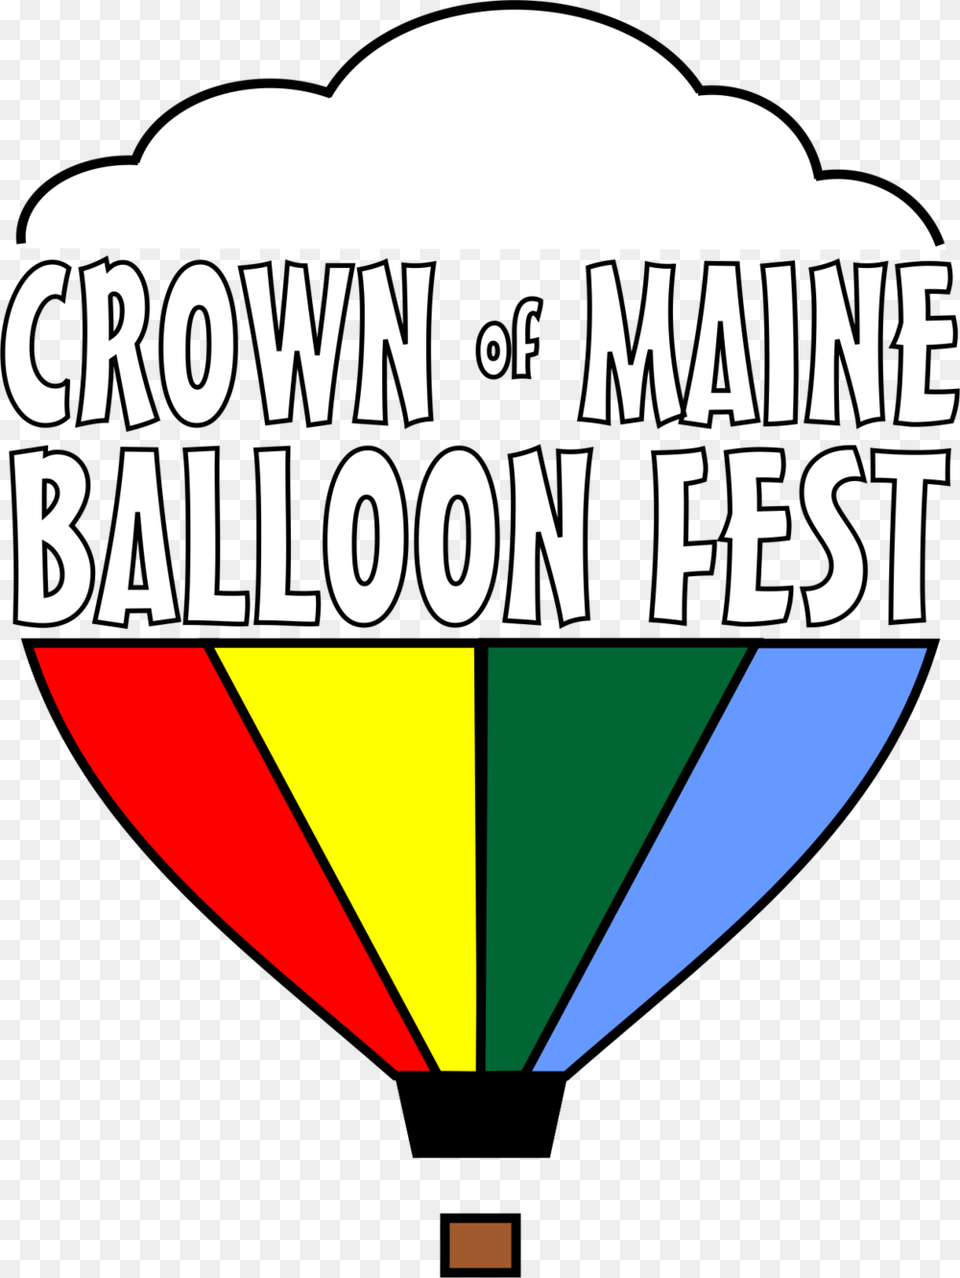 Crown Of Maine Balloon Fest Clipart Crown Of Maine Balloon Fest, Aircraft, Transportation, Vehicle Free Png Download